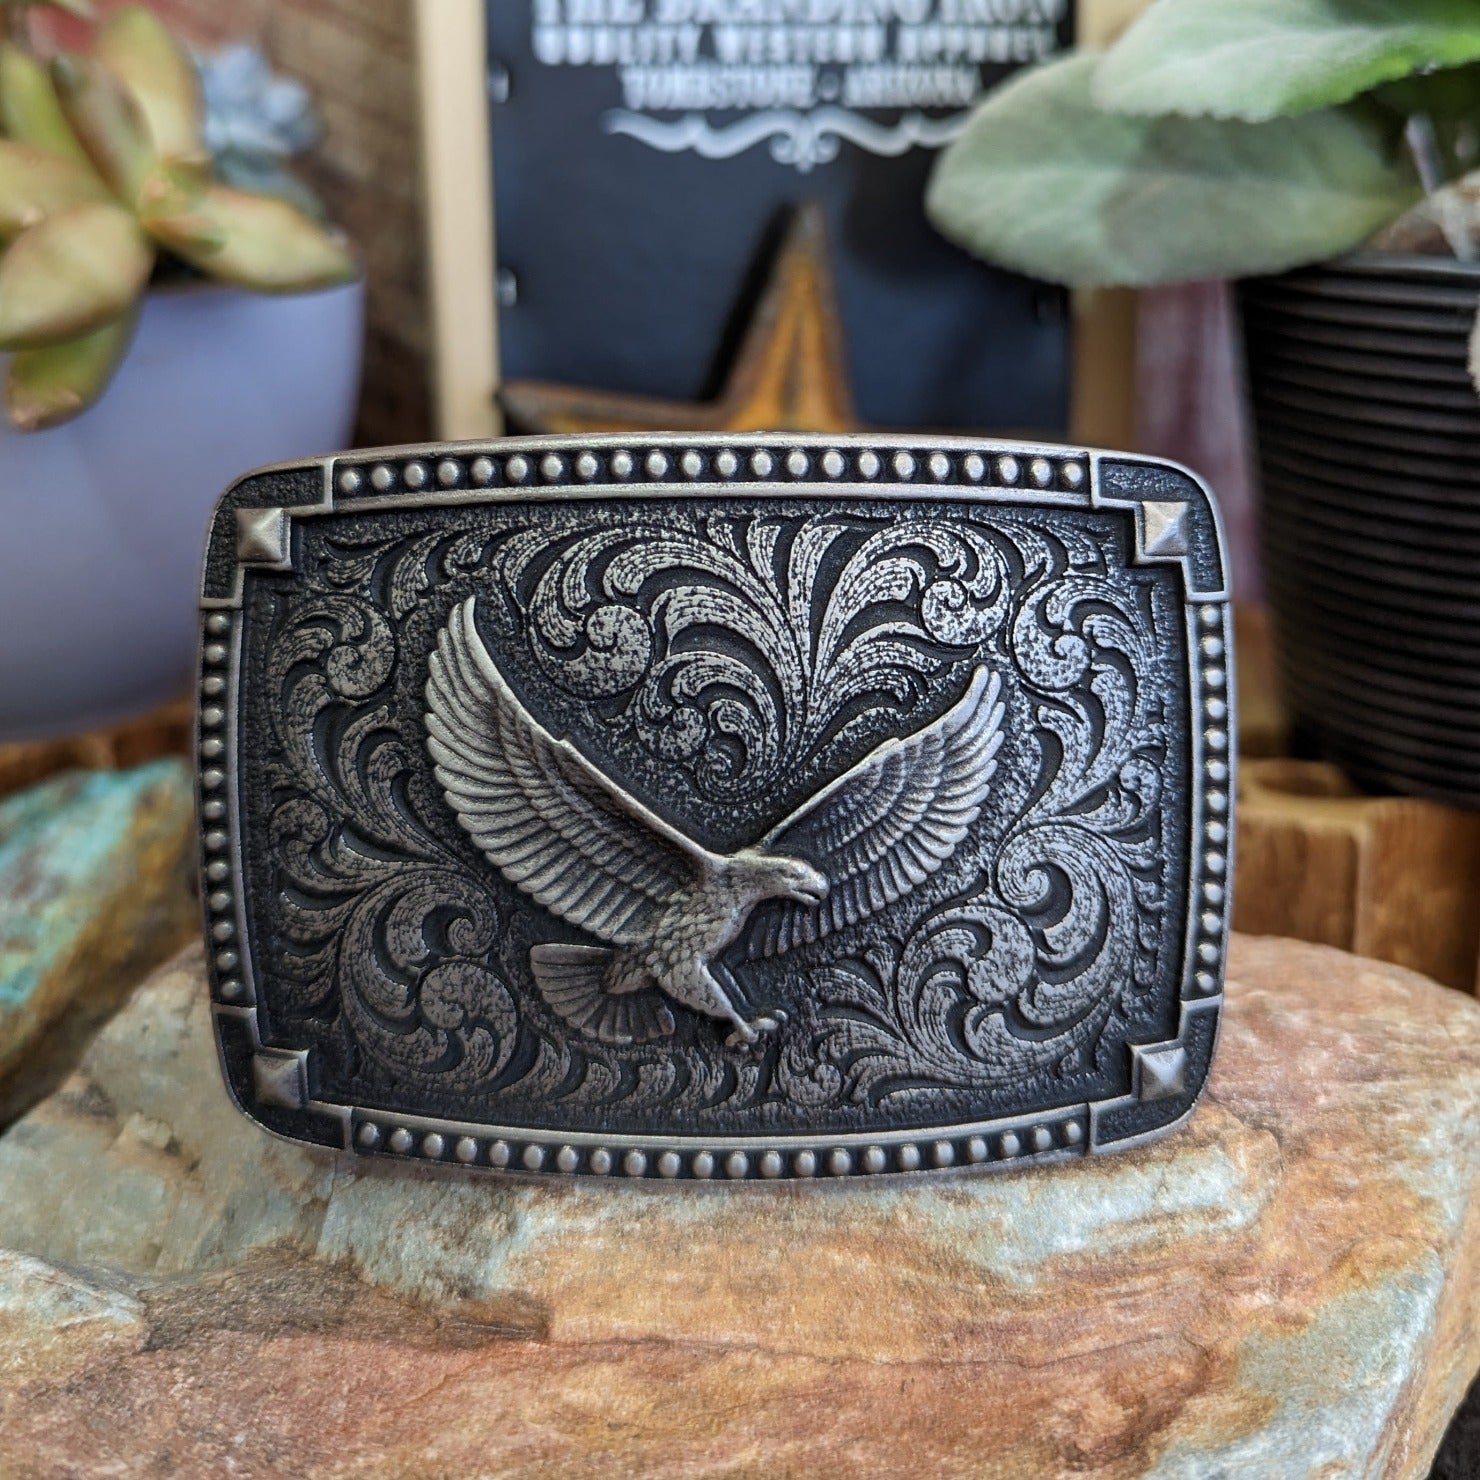 Belt Buckle the Soaring Eagle by Montana Silversmiths A566 – The Branding  Iron-Tombstone, AZ